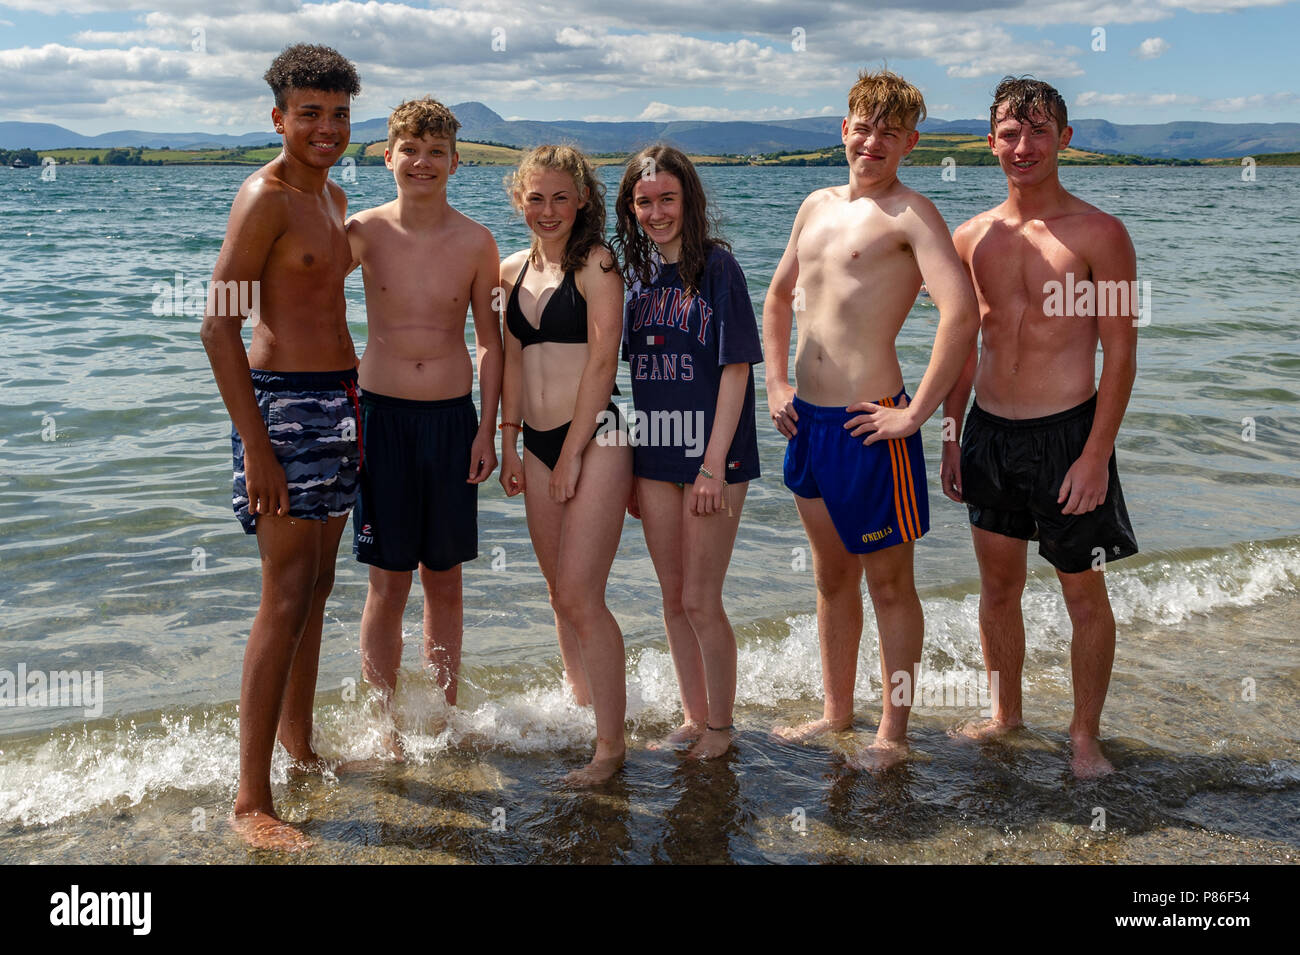 Bantry, Ireland. 9th July, 2018. A group of friends enjoy the sun on Bantry beach earlier today. The heatwave is set to continue for the next week with temperatures hovering around the mid to high 20° Celsius mark. Credit: Andy Gibson/Alamy Live News. Stock Photo